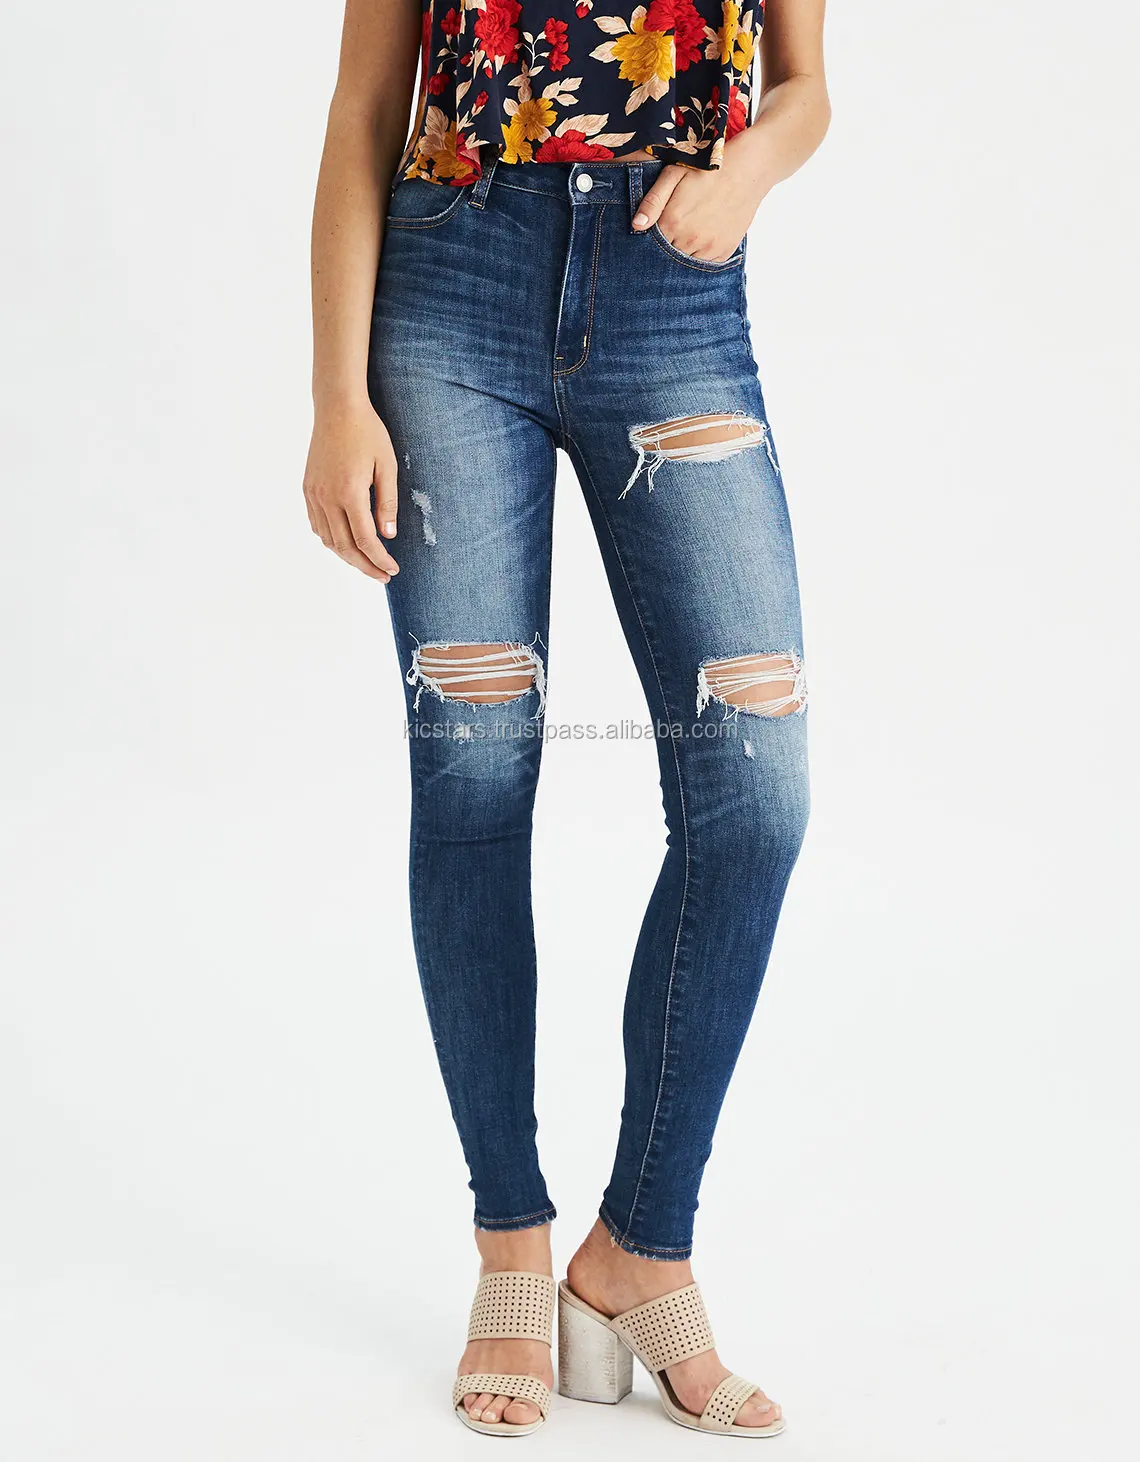 jeans style for girl